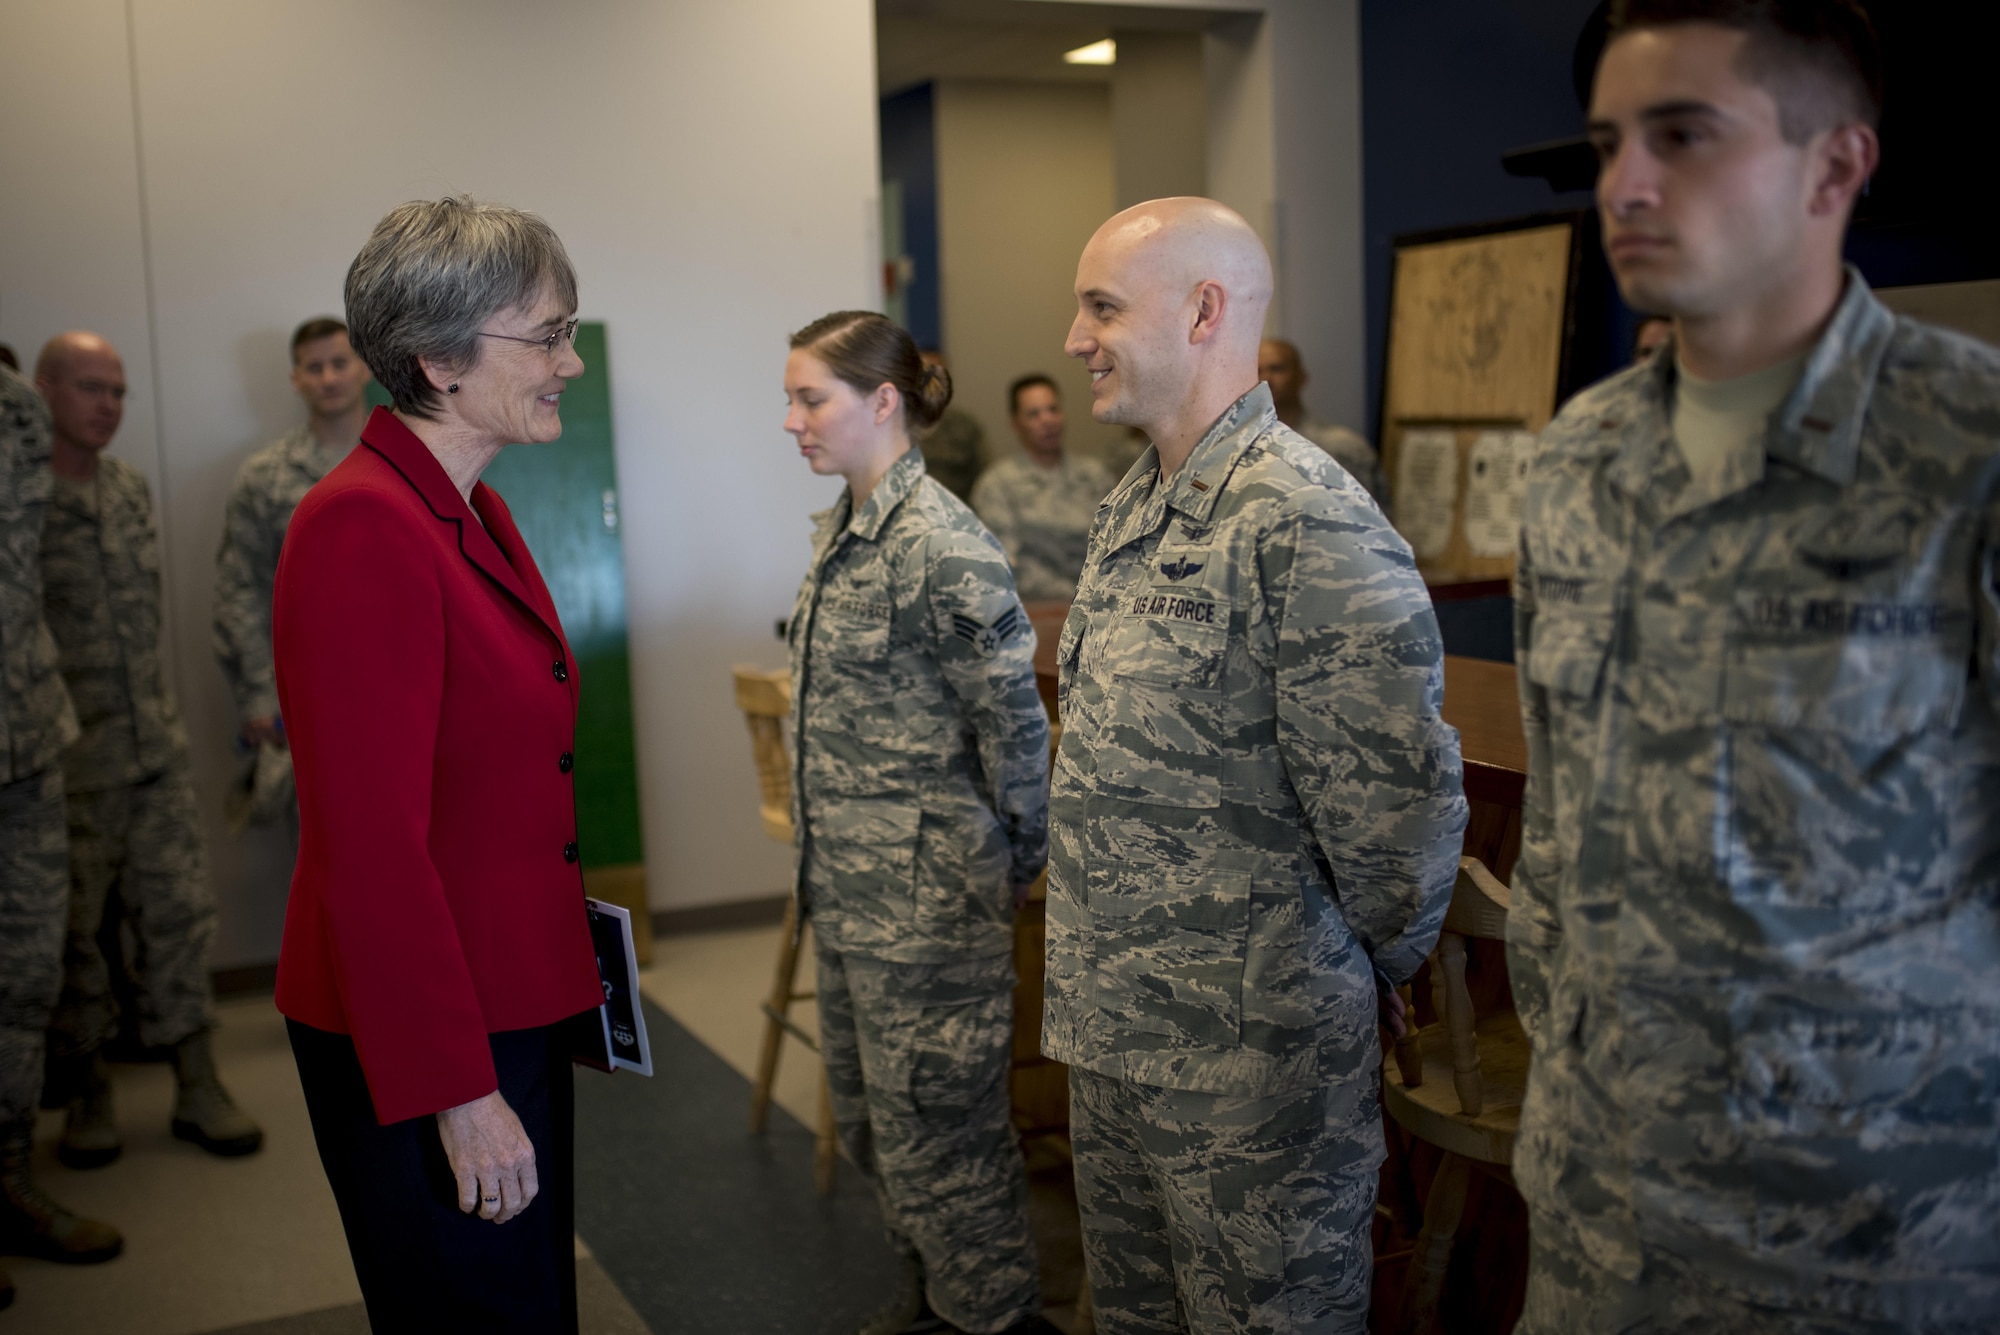 Secretary of the Air Force Heather Wilson speaks with 2nd Lt. Trevis Day, 4th Space Control Squadron crew commander, during her first base visit as SECAF to Peterson Air Force Base, Colo., May 22, 2017. Wilson met with Airmen who execute space control operations in support of Air Force Space Command and combatant commander priorities. (U.S. Air Force photo by Airman 1st Class Dennis Hoffman)